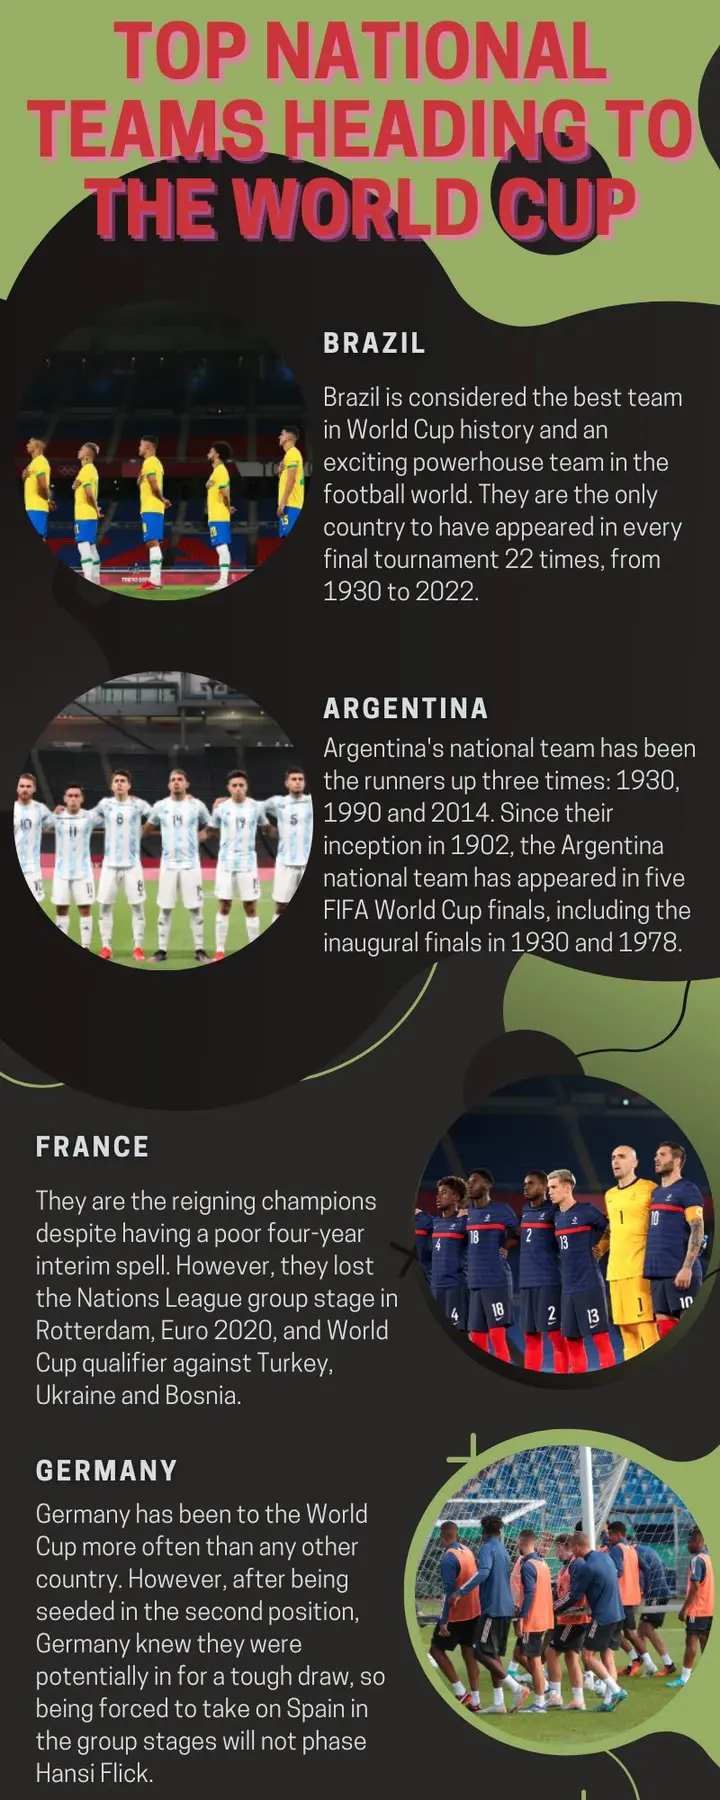 How Are Soccer Teams Ranked? (FIFA, Club, National Rankings)